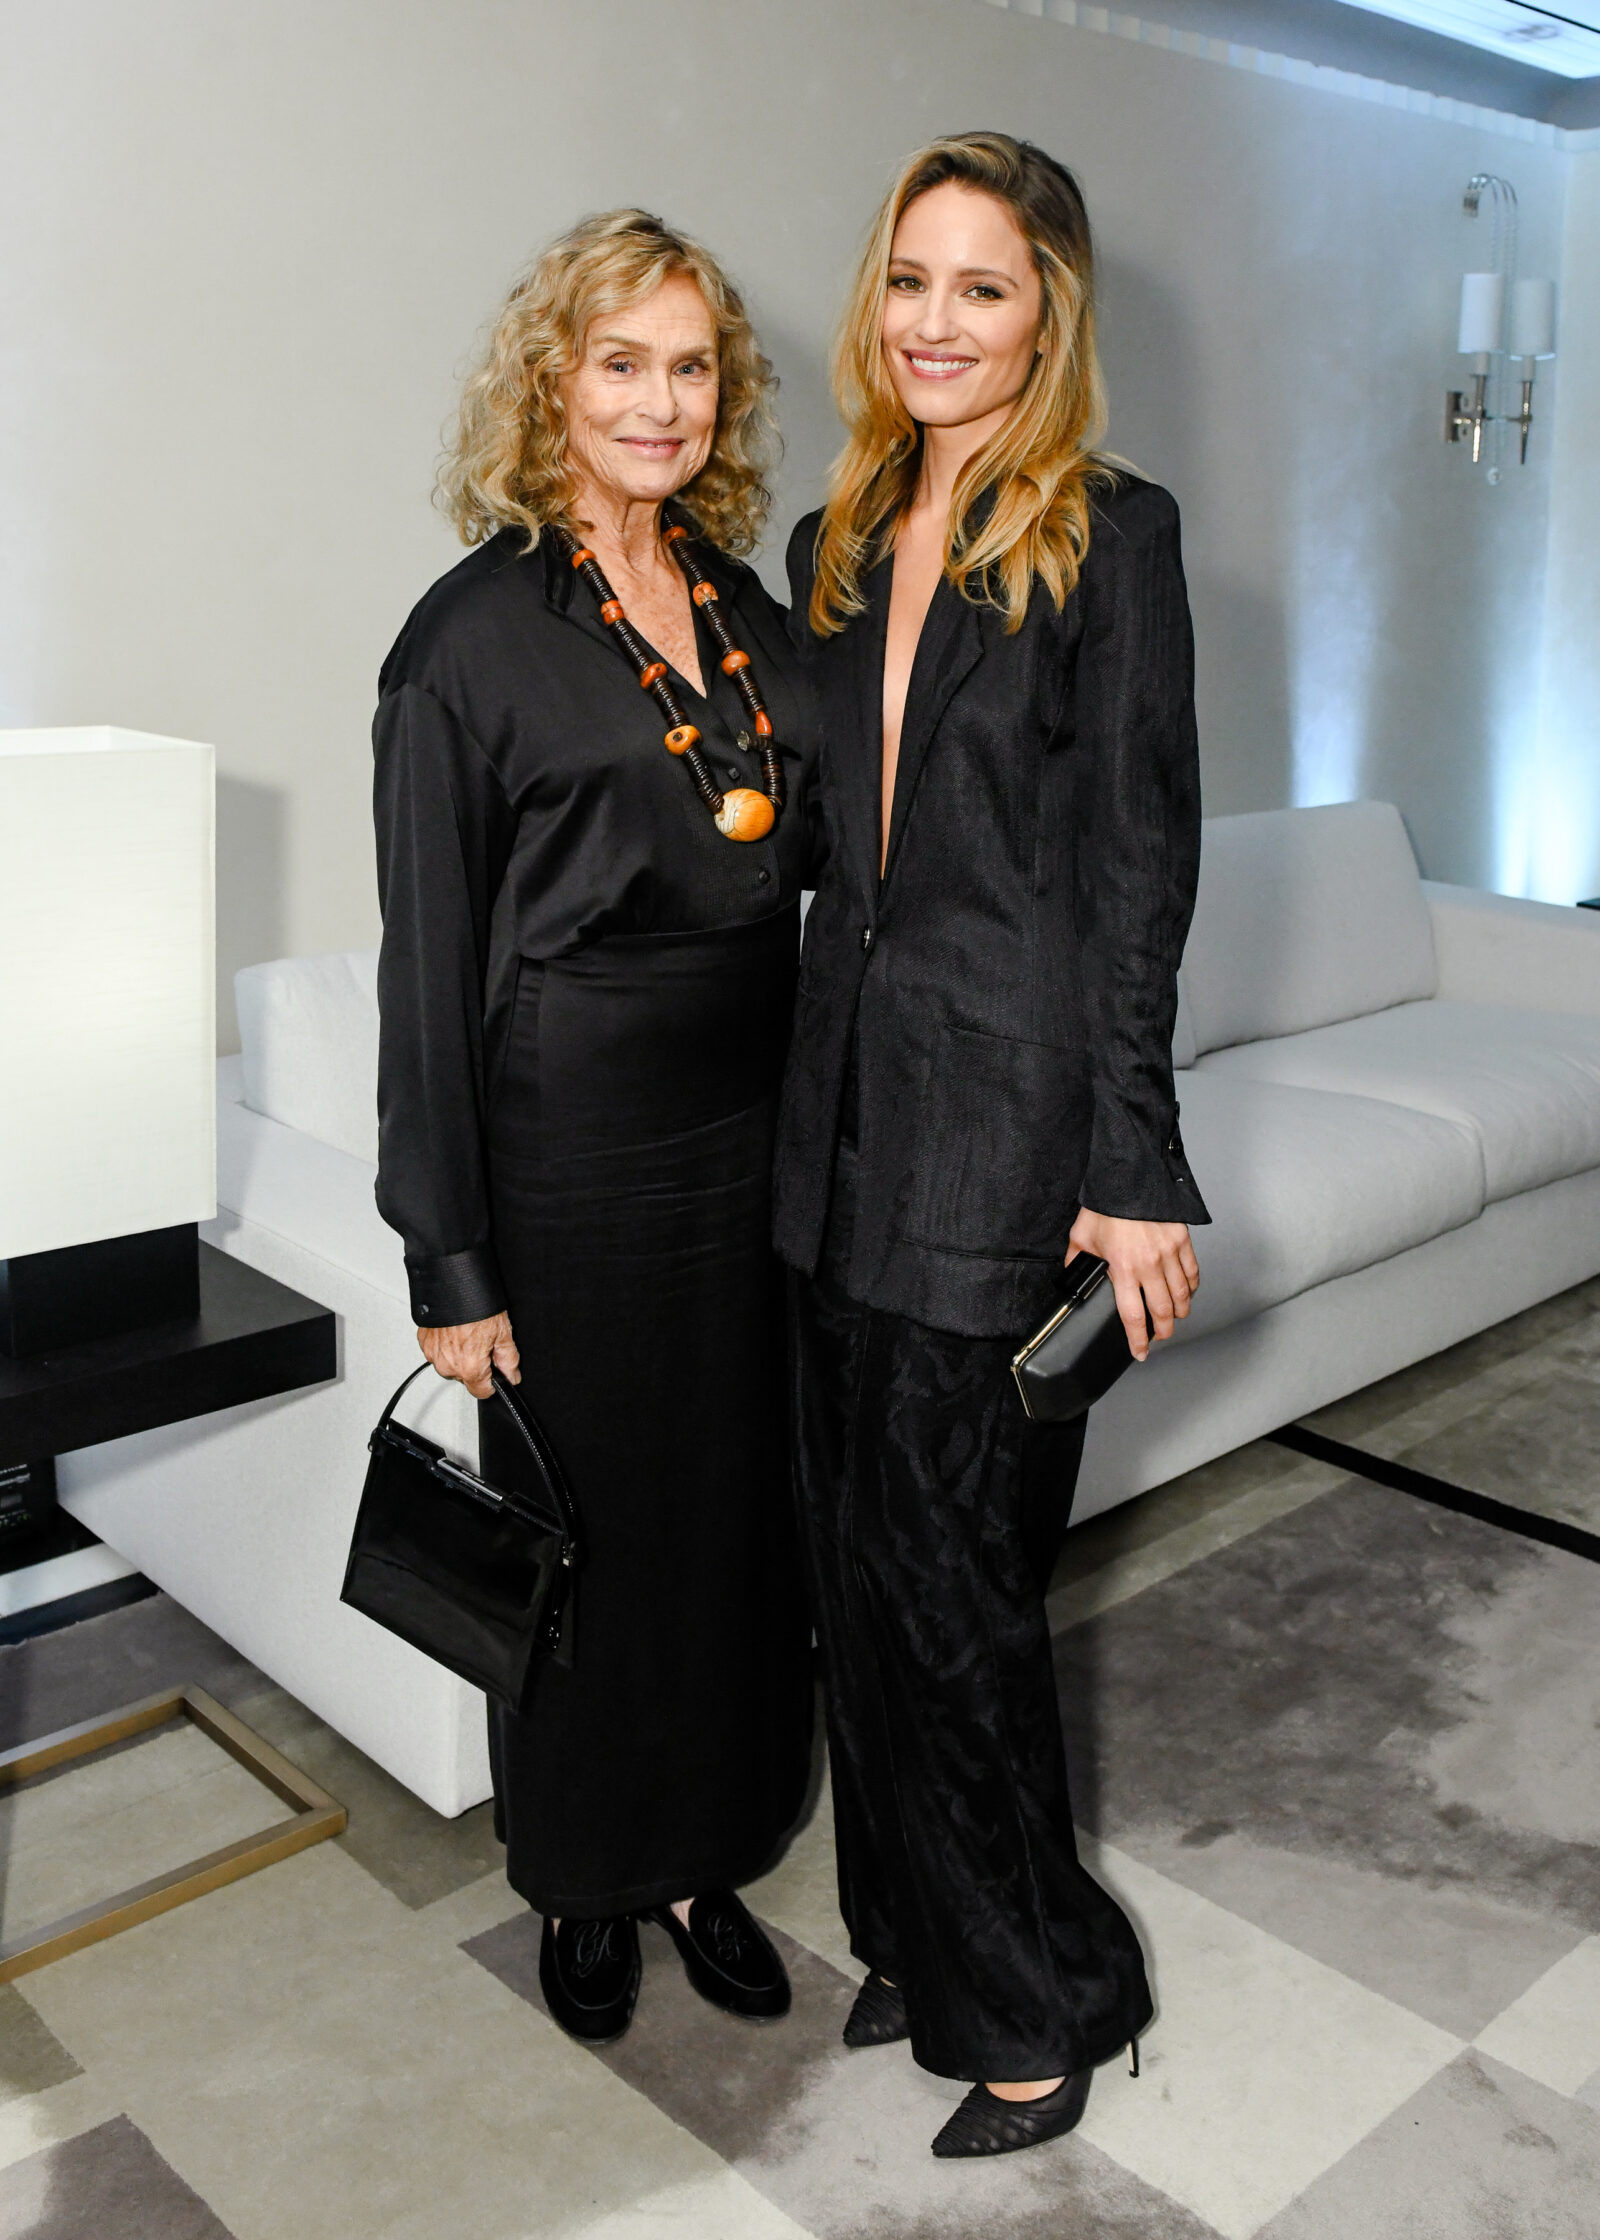 Dianna Agron and Lauren Hutton radiate timeless elegance as they celebrate the reopening of Giorgio Armani Boutique at Bergdorf Goodman.